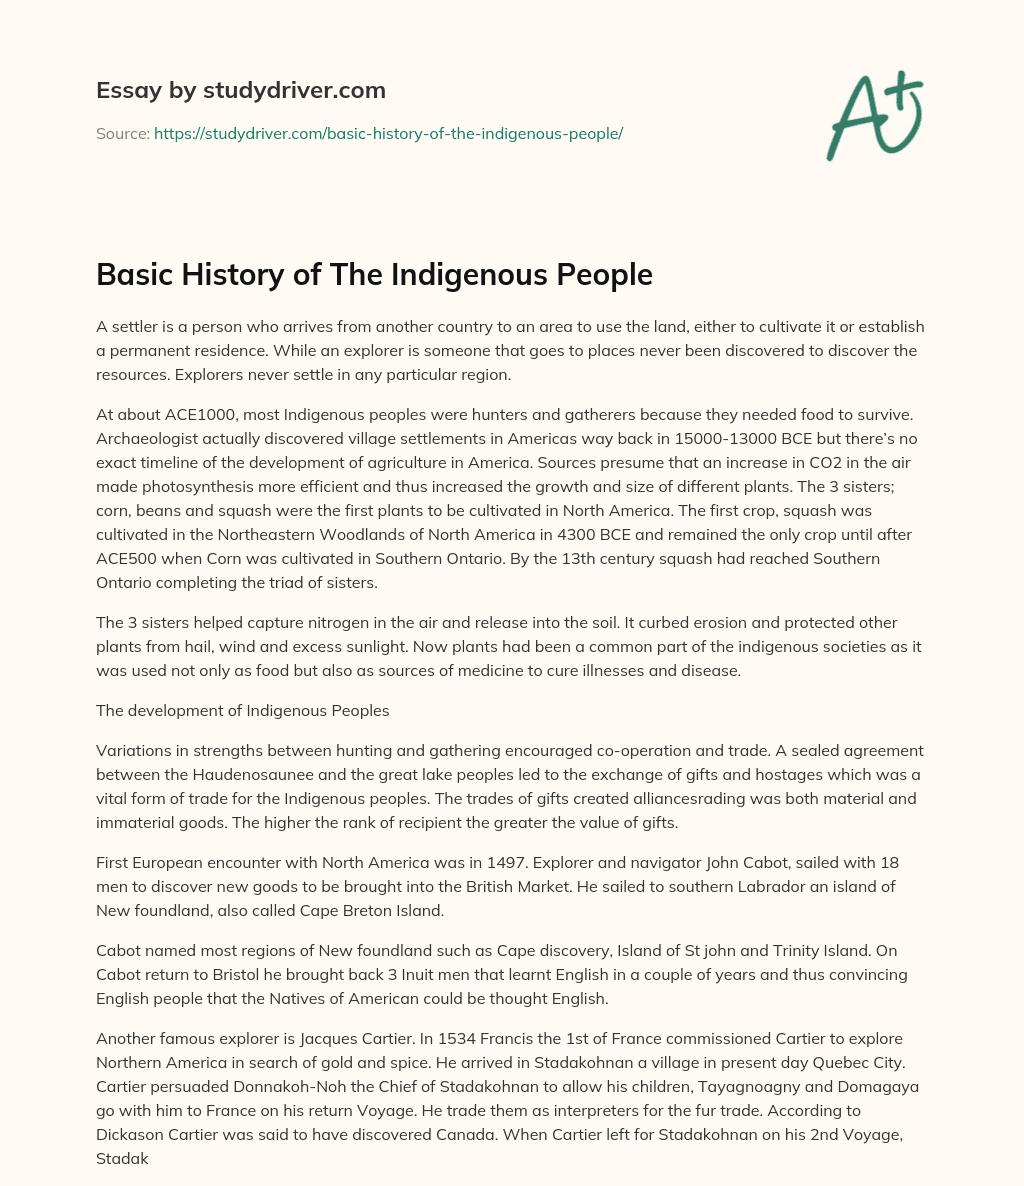 Basic History of the Indigenous People essay